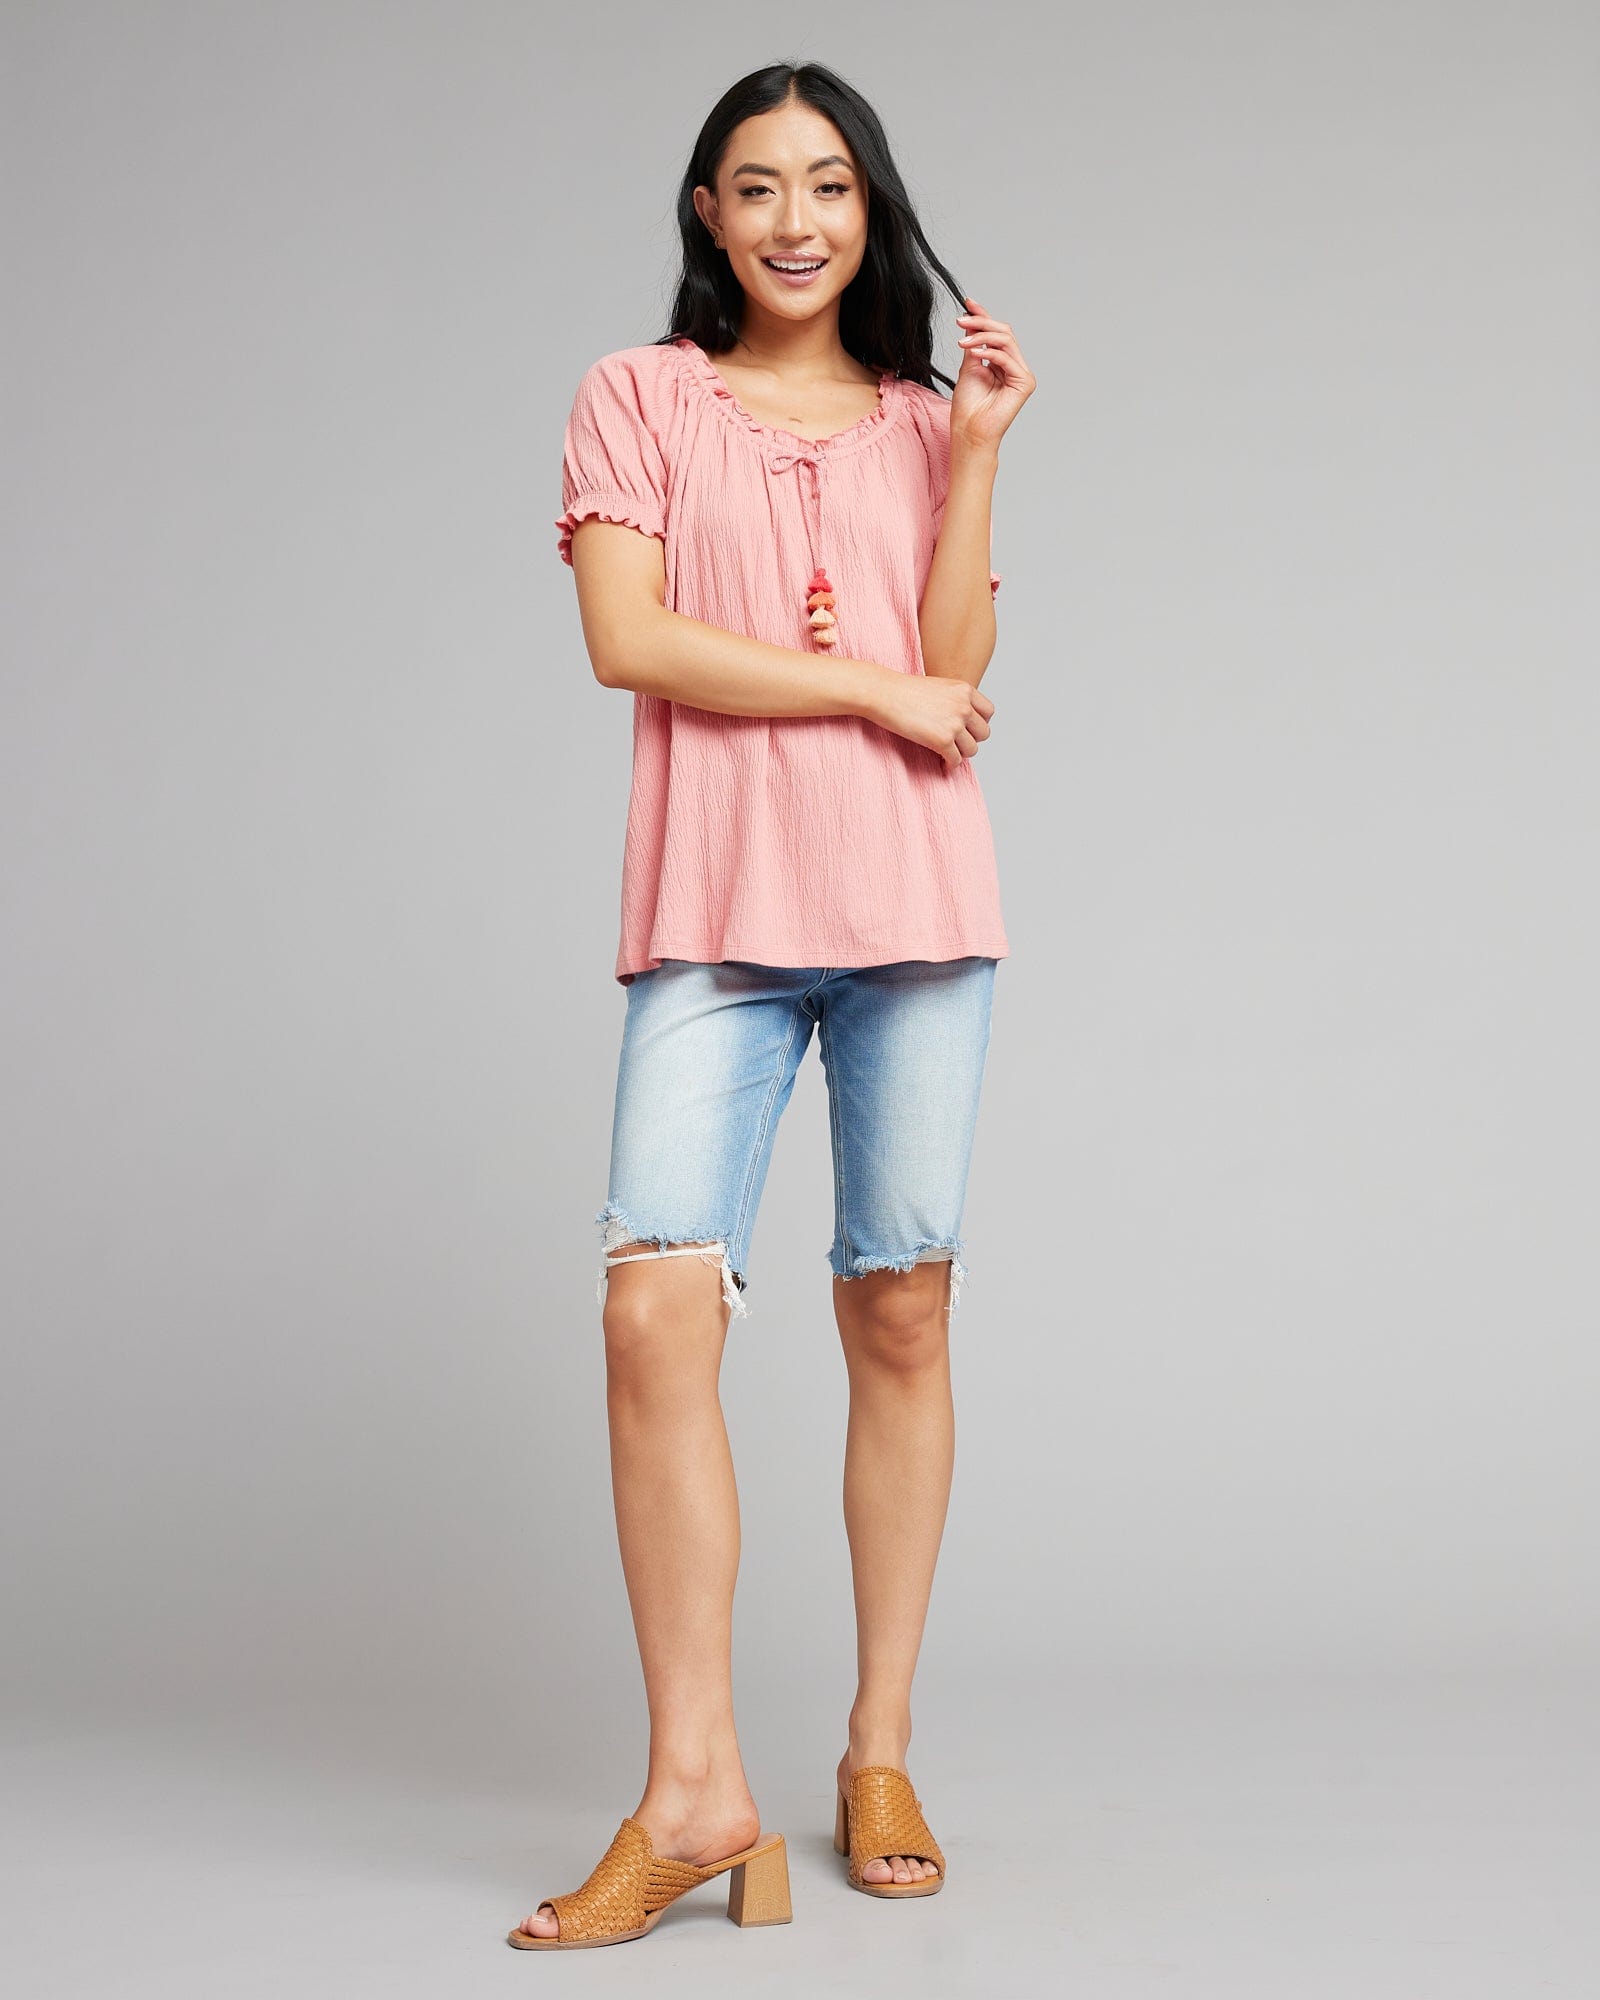 Women in a pink short sleeve blouse with tassels at neckline